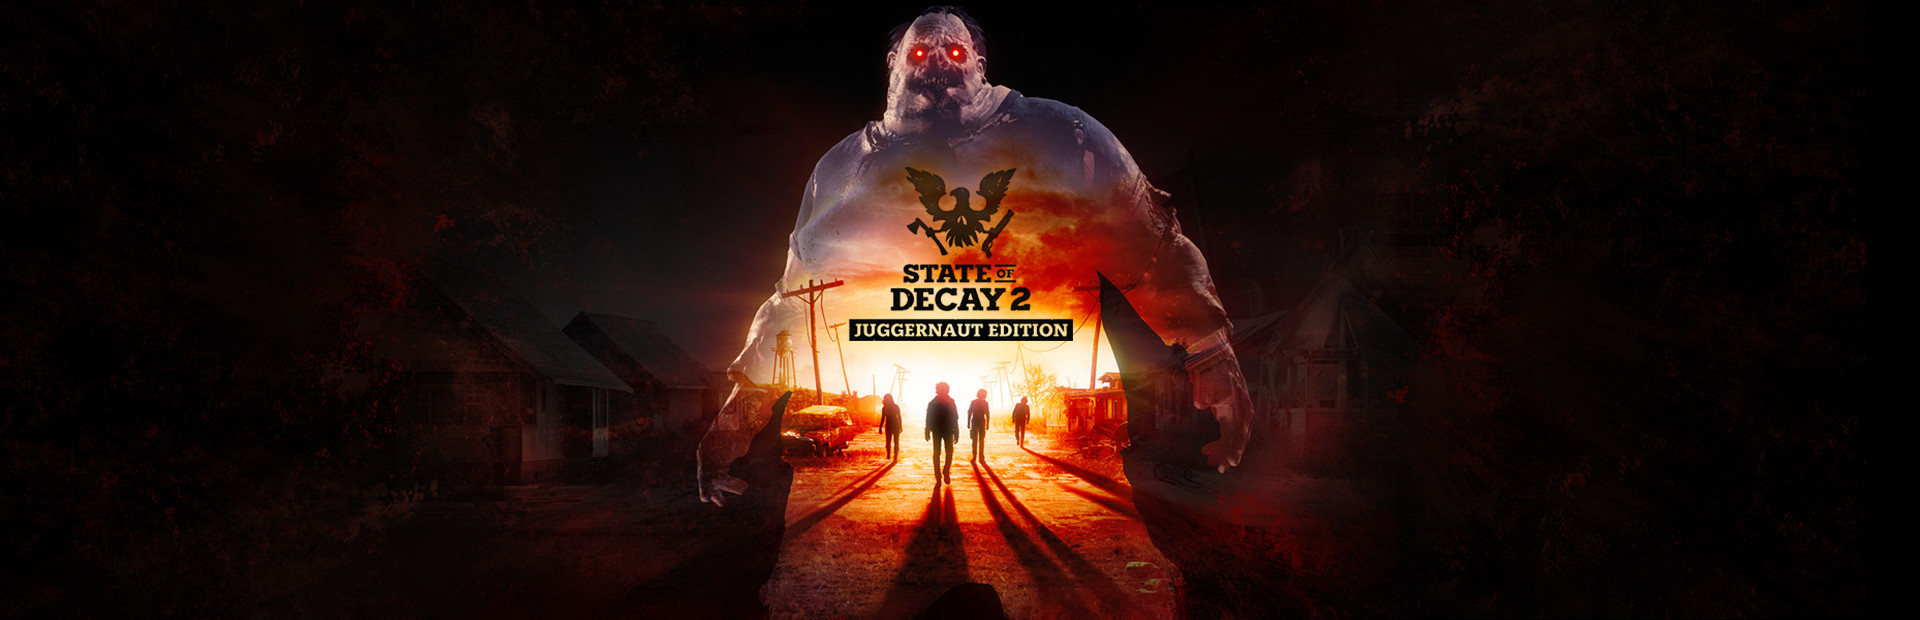 State of Decay 2: Juggernaut Edition cover image